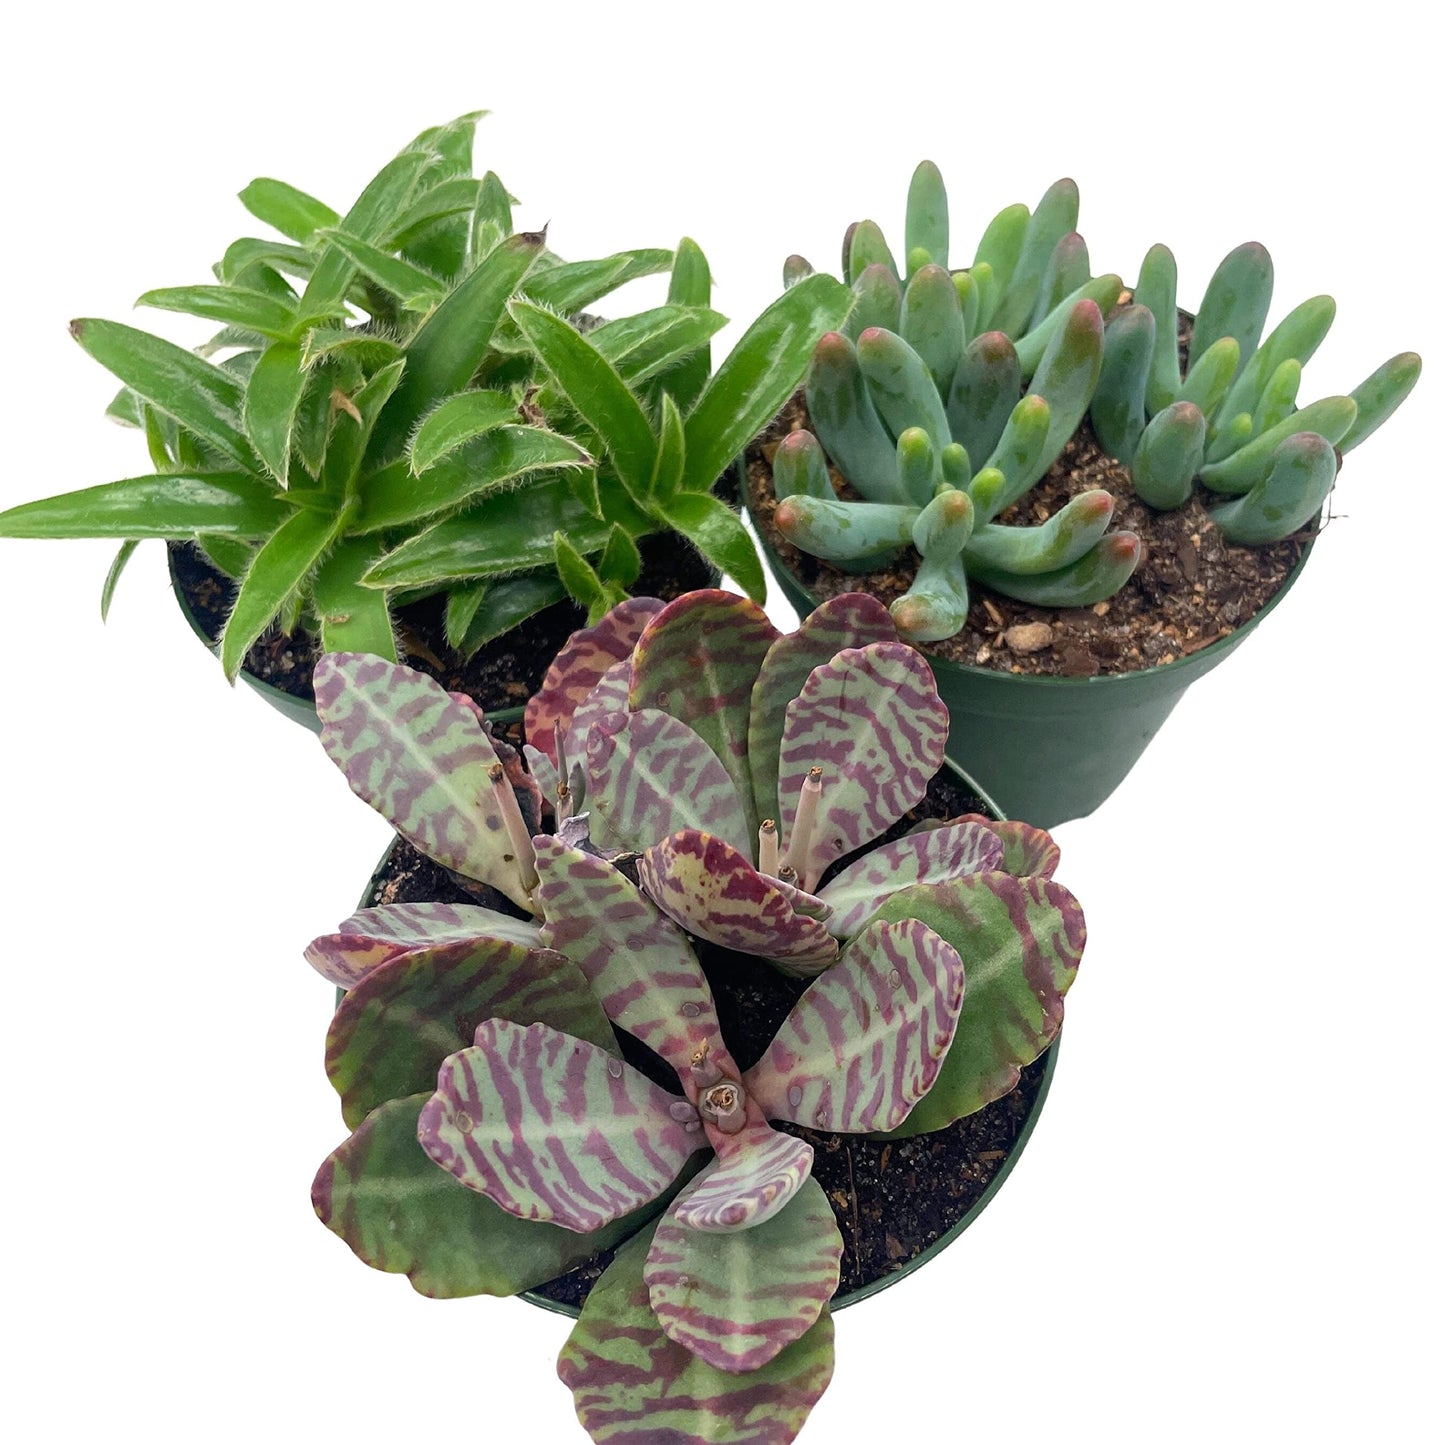 Succulent Assortment Set, 4 inch pots, Set of 3, Variety, Jade Plant, Jelly Beans, Humilis, Taco Plants, and More